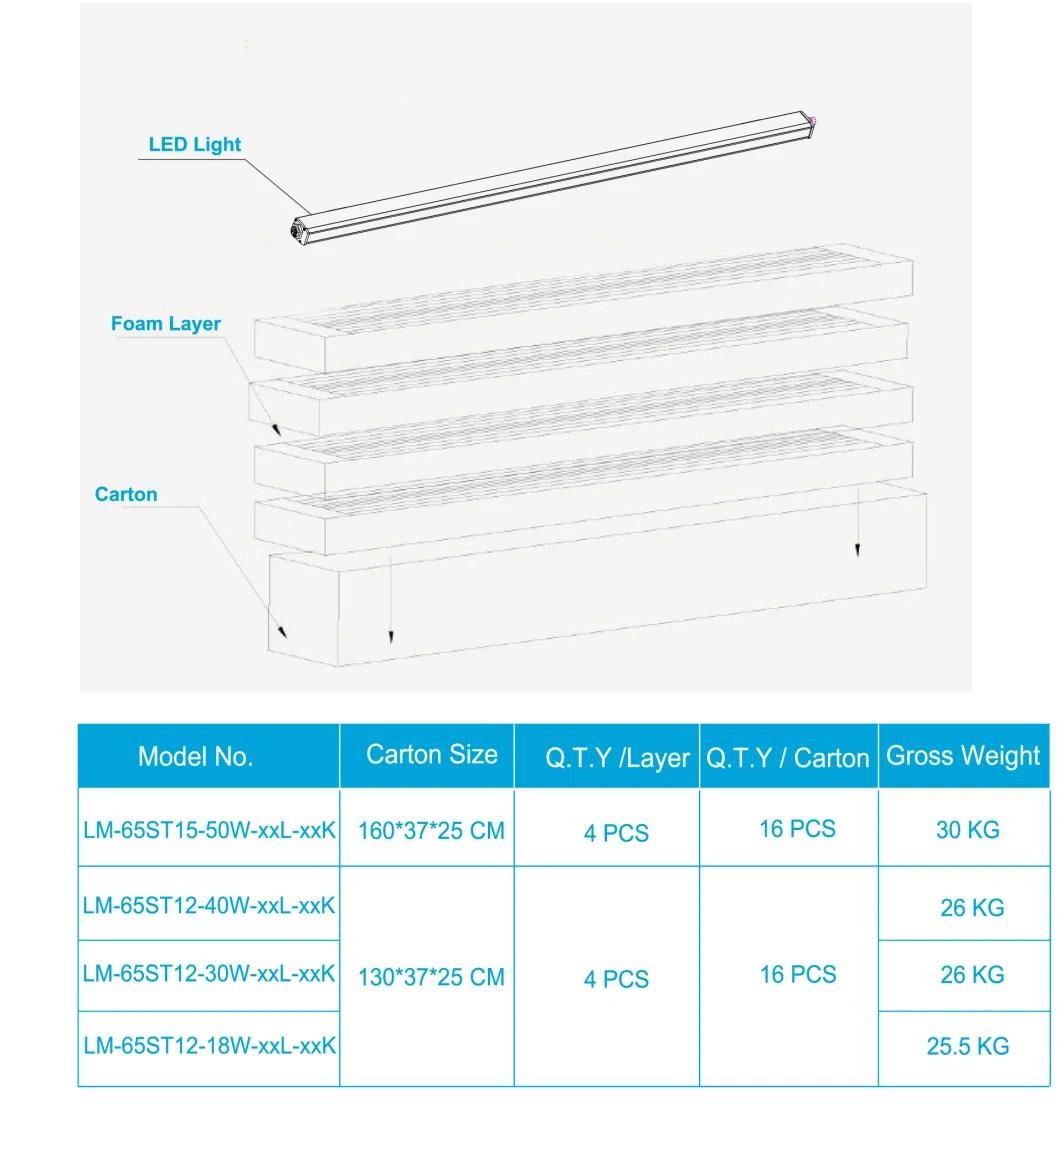 DIY Conection Smart Dimmable LED Linear Light with Dlc ETL